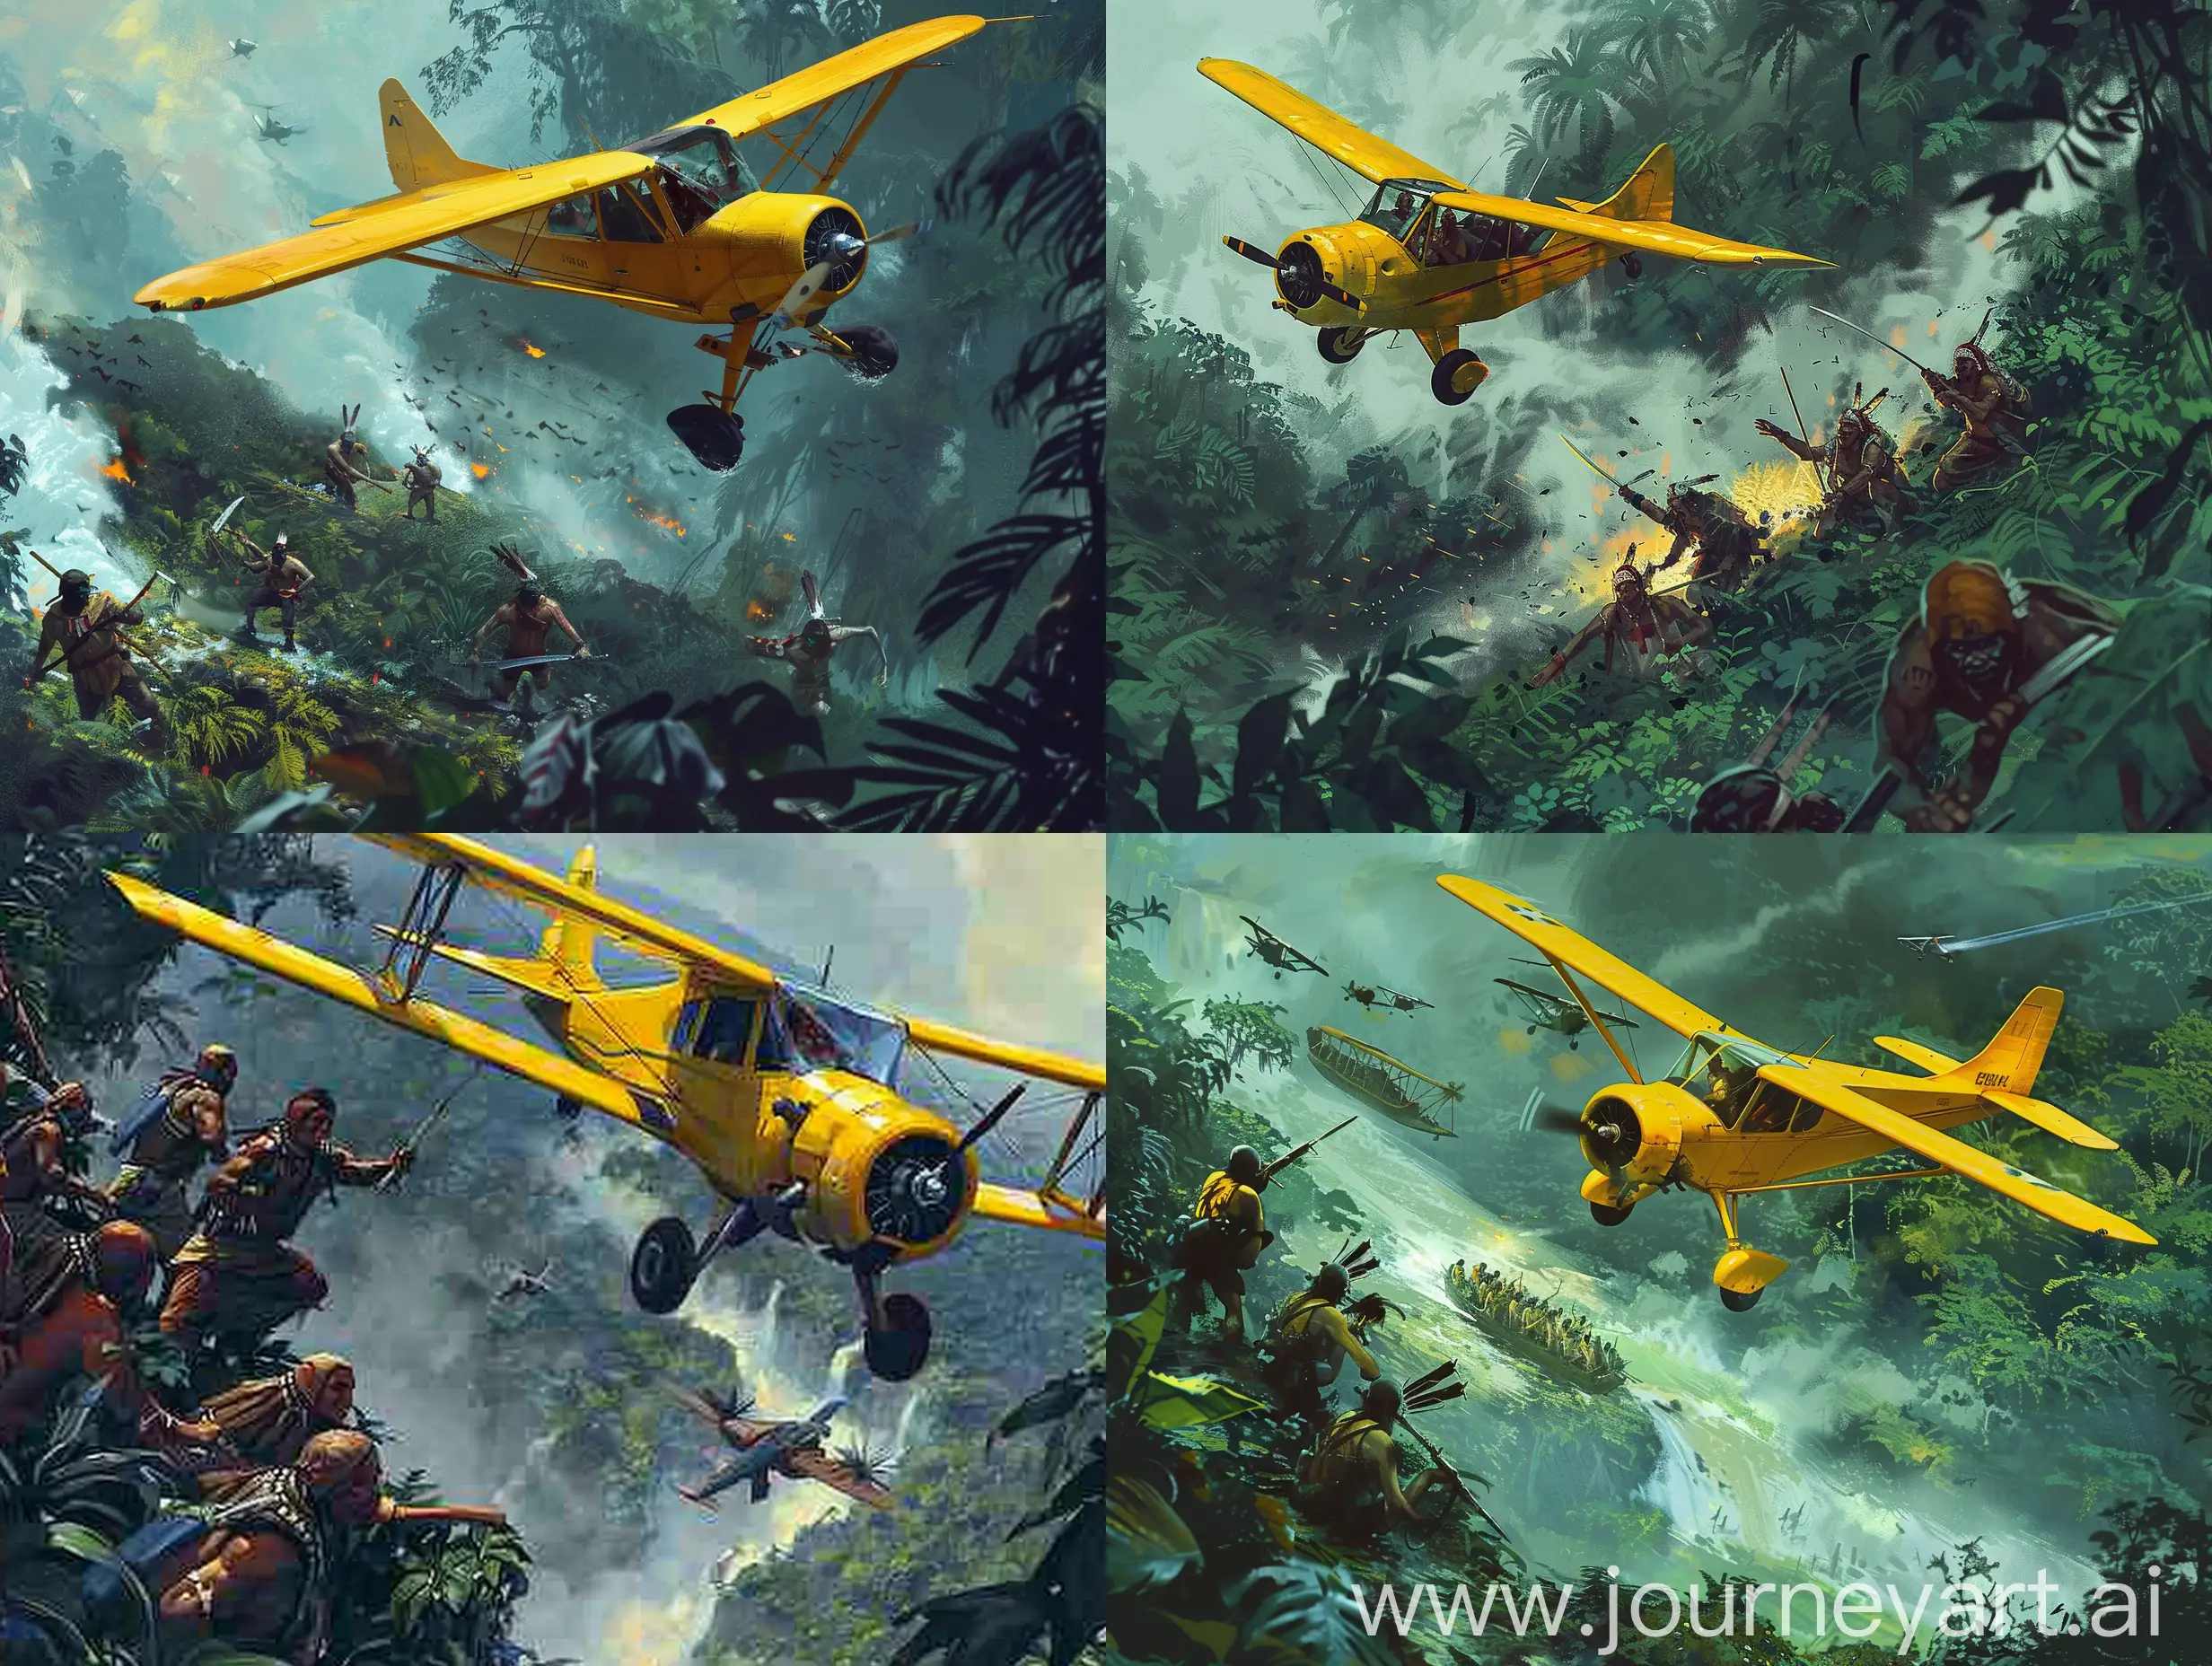 Create an image of a yellow single-engine plane flying over a group of 4 missionaries and a group of hostile Indians in an attack position in the Amazon rainforest. Create an image of a yellow single-engine plane flying over a group of 4 missionaries and a group of hostile Indians in an attack position in the Amazon rainforest. Do not allow dualities in the image.